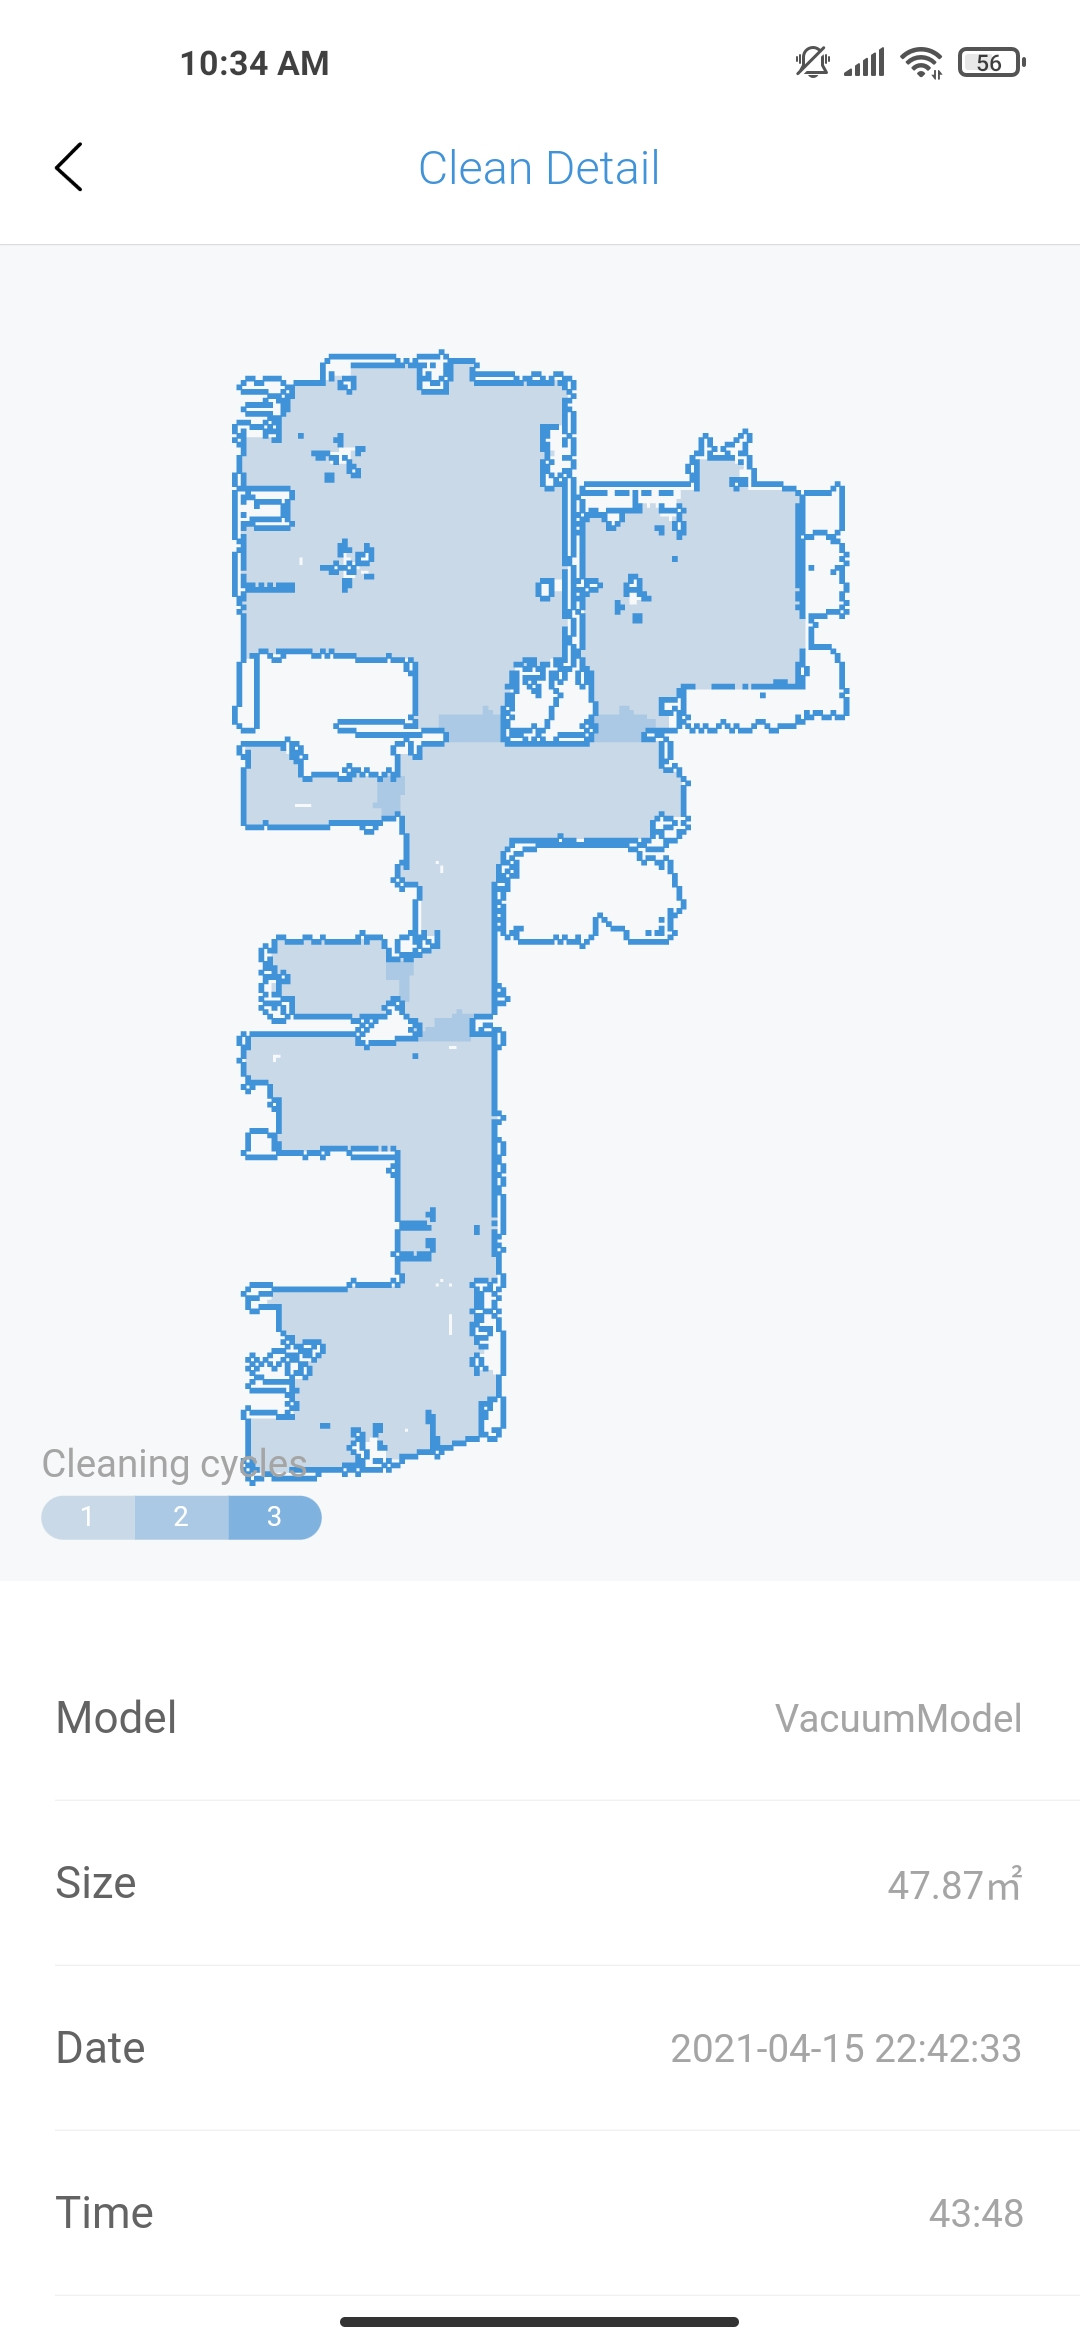 Vacuum mode, 1 cleaning cycle